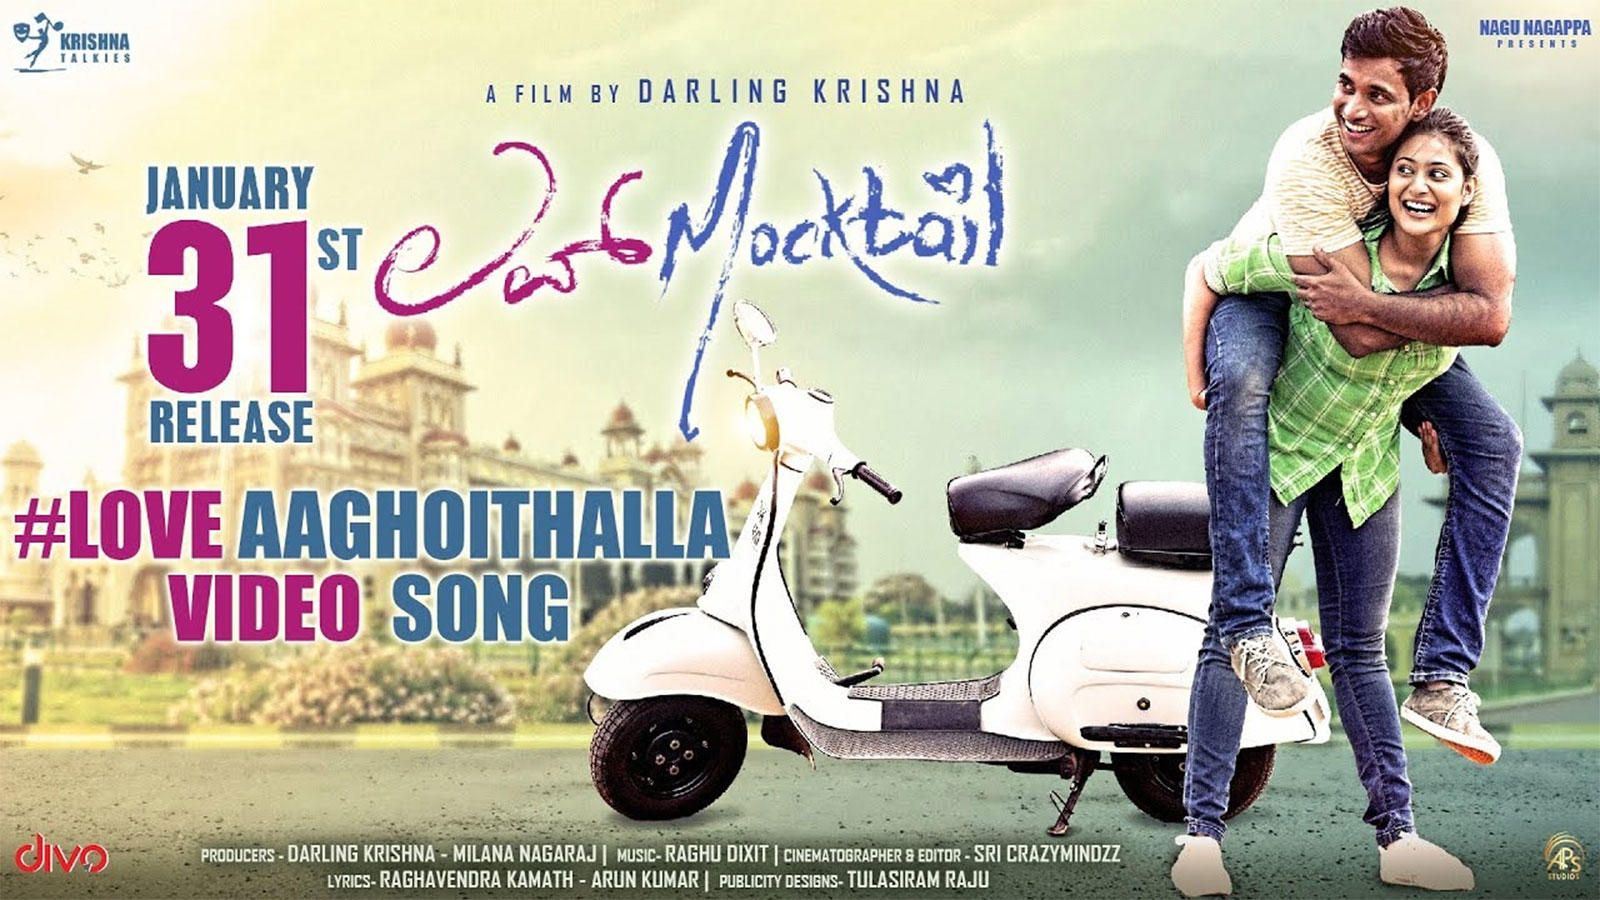 Love Mocktail Song Oh Oh Love ghoithalla Kannada Video Songs Times Of India